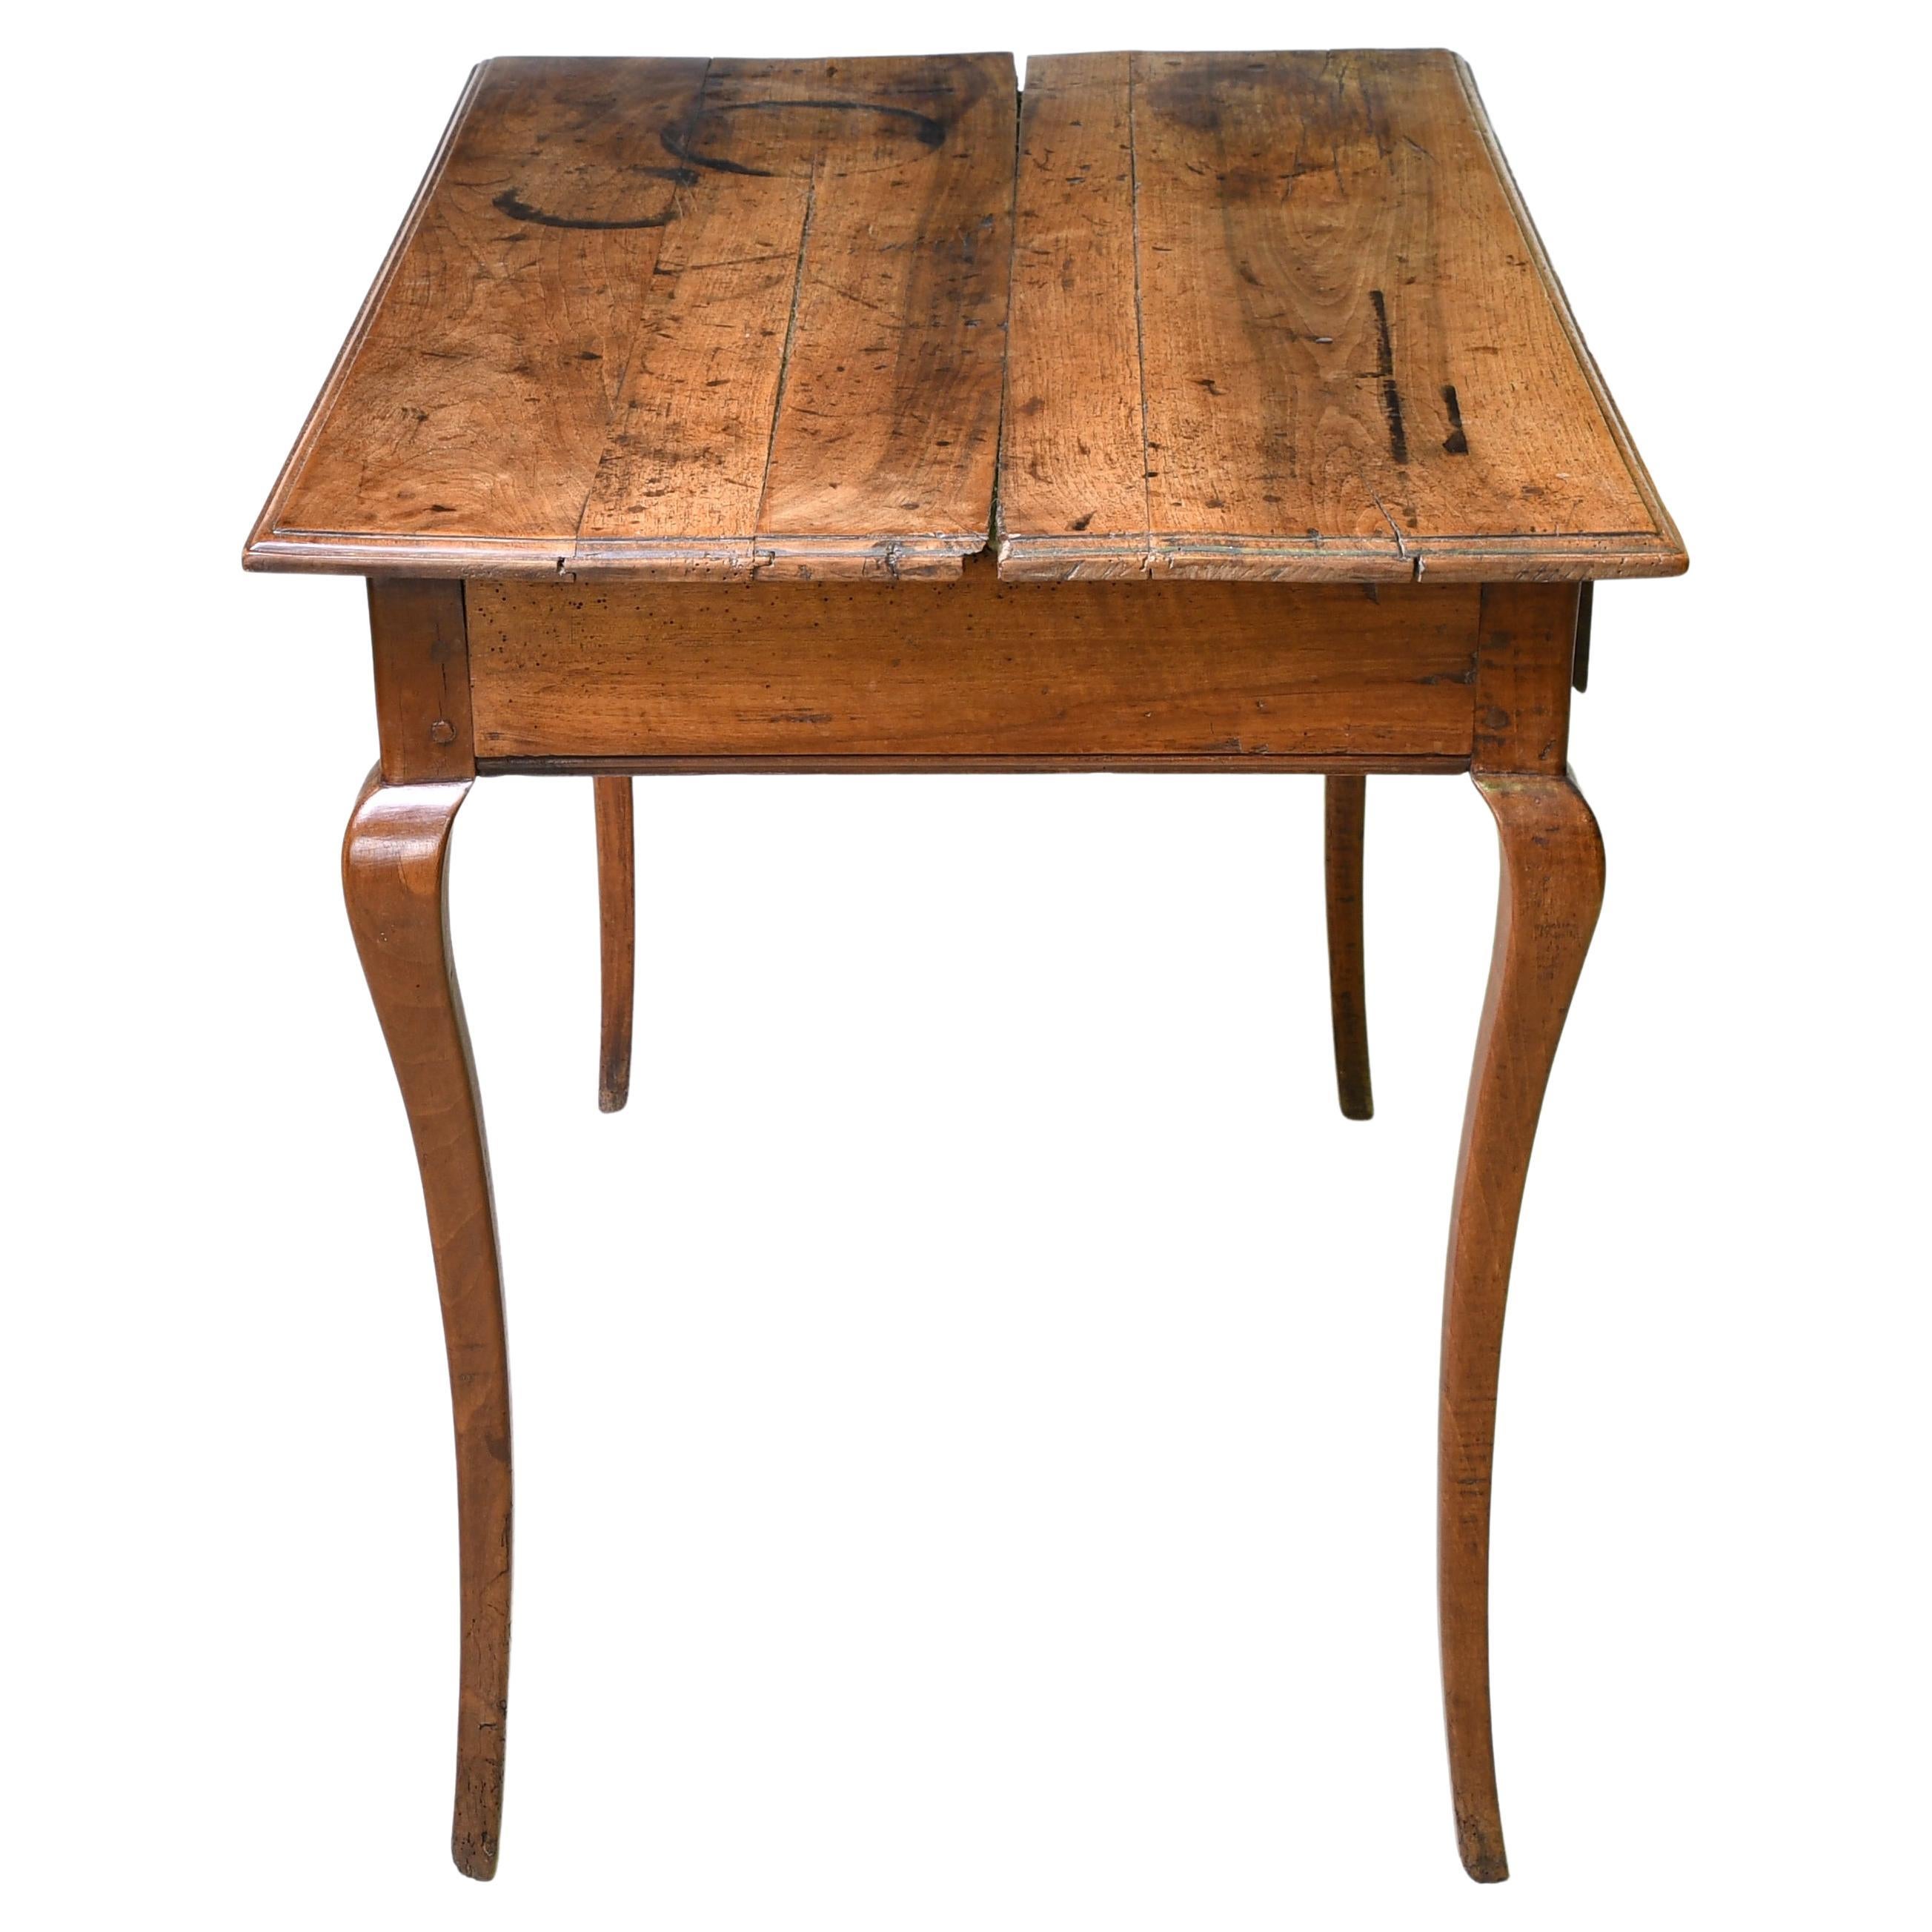 French Provincial Cherry Writing Table or Bedside Table with Drawer, circa 1800 For Sale 2